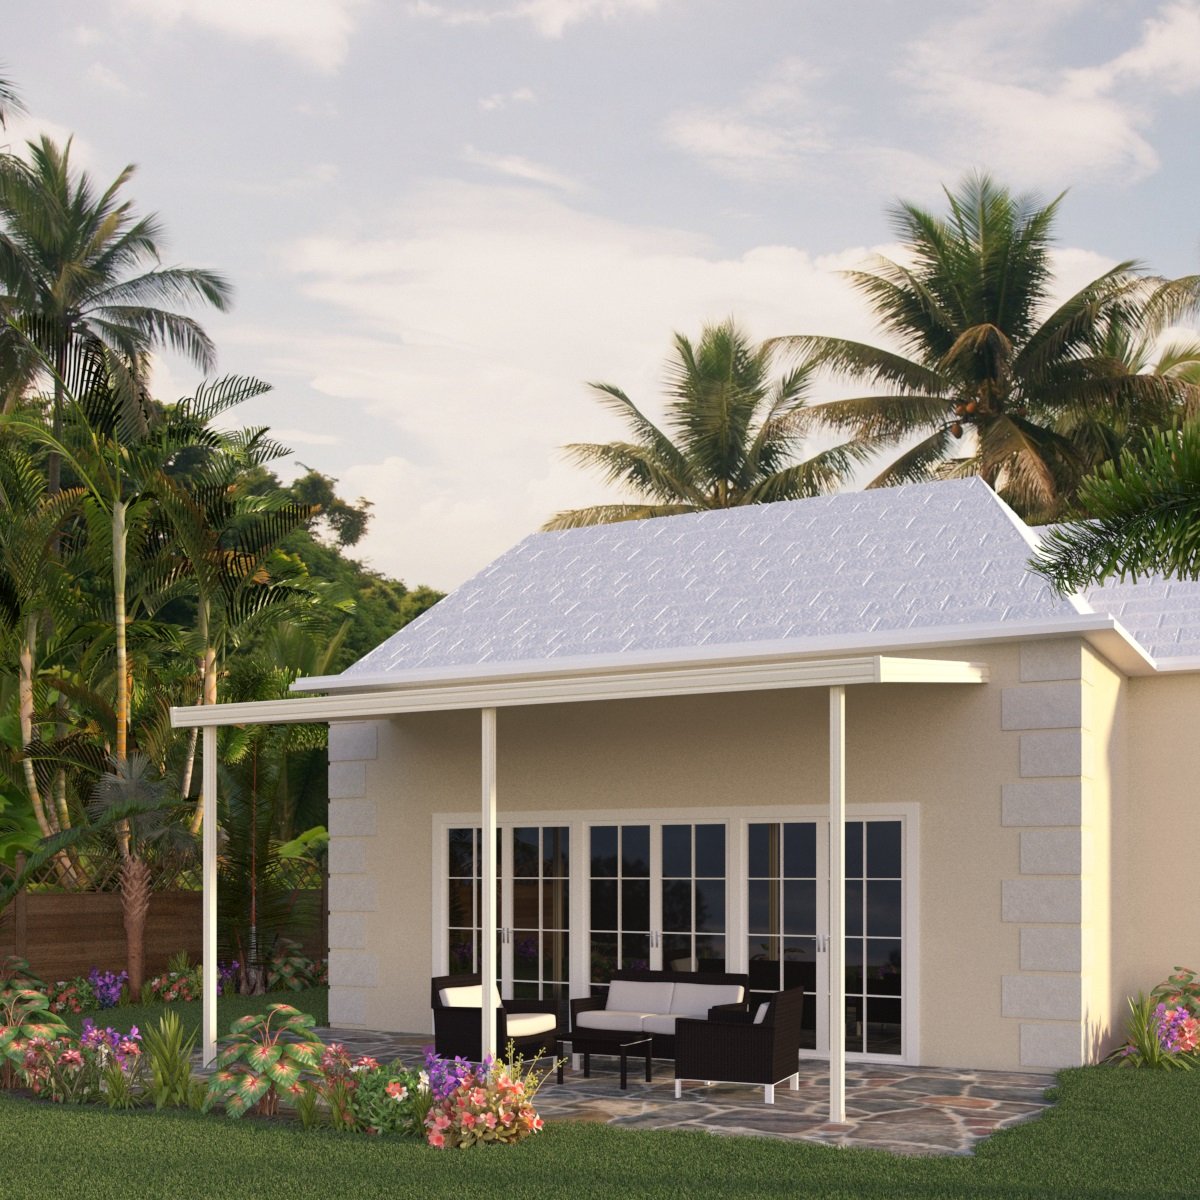 12 ft. Deep x 16 ft. Wide Ivory Attached Aluminum Patio Cover -3 Posts - (10lb Low Snow Area)